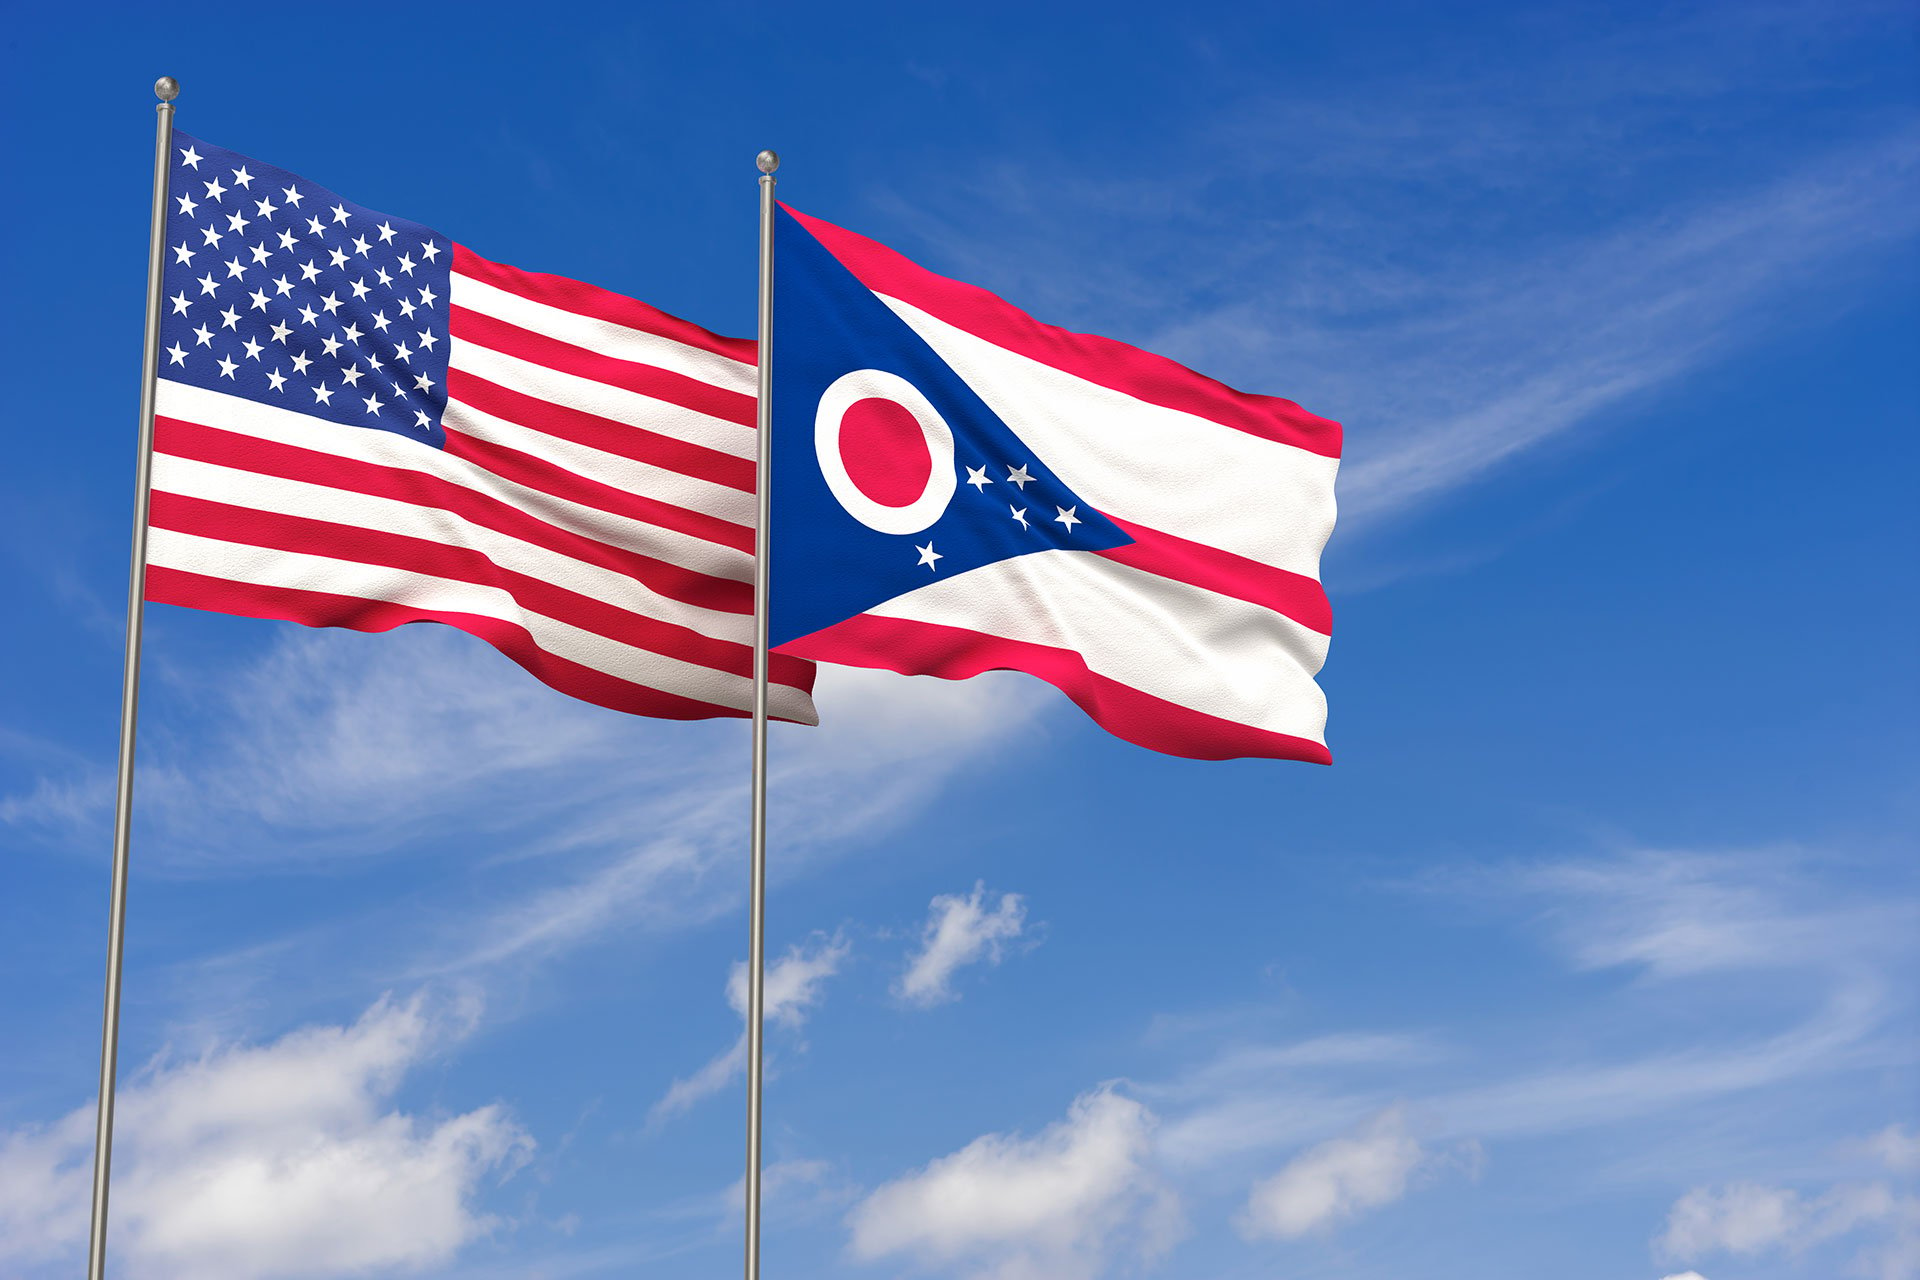 USA and state of Ohio flags